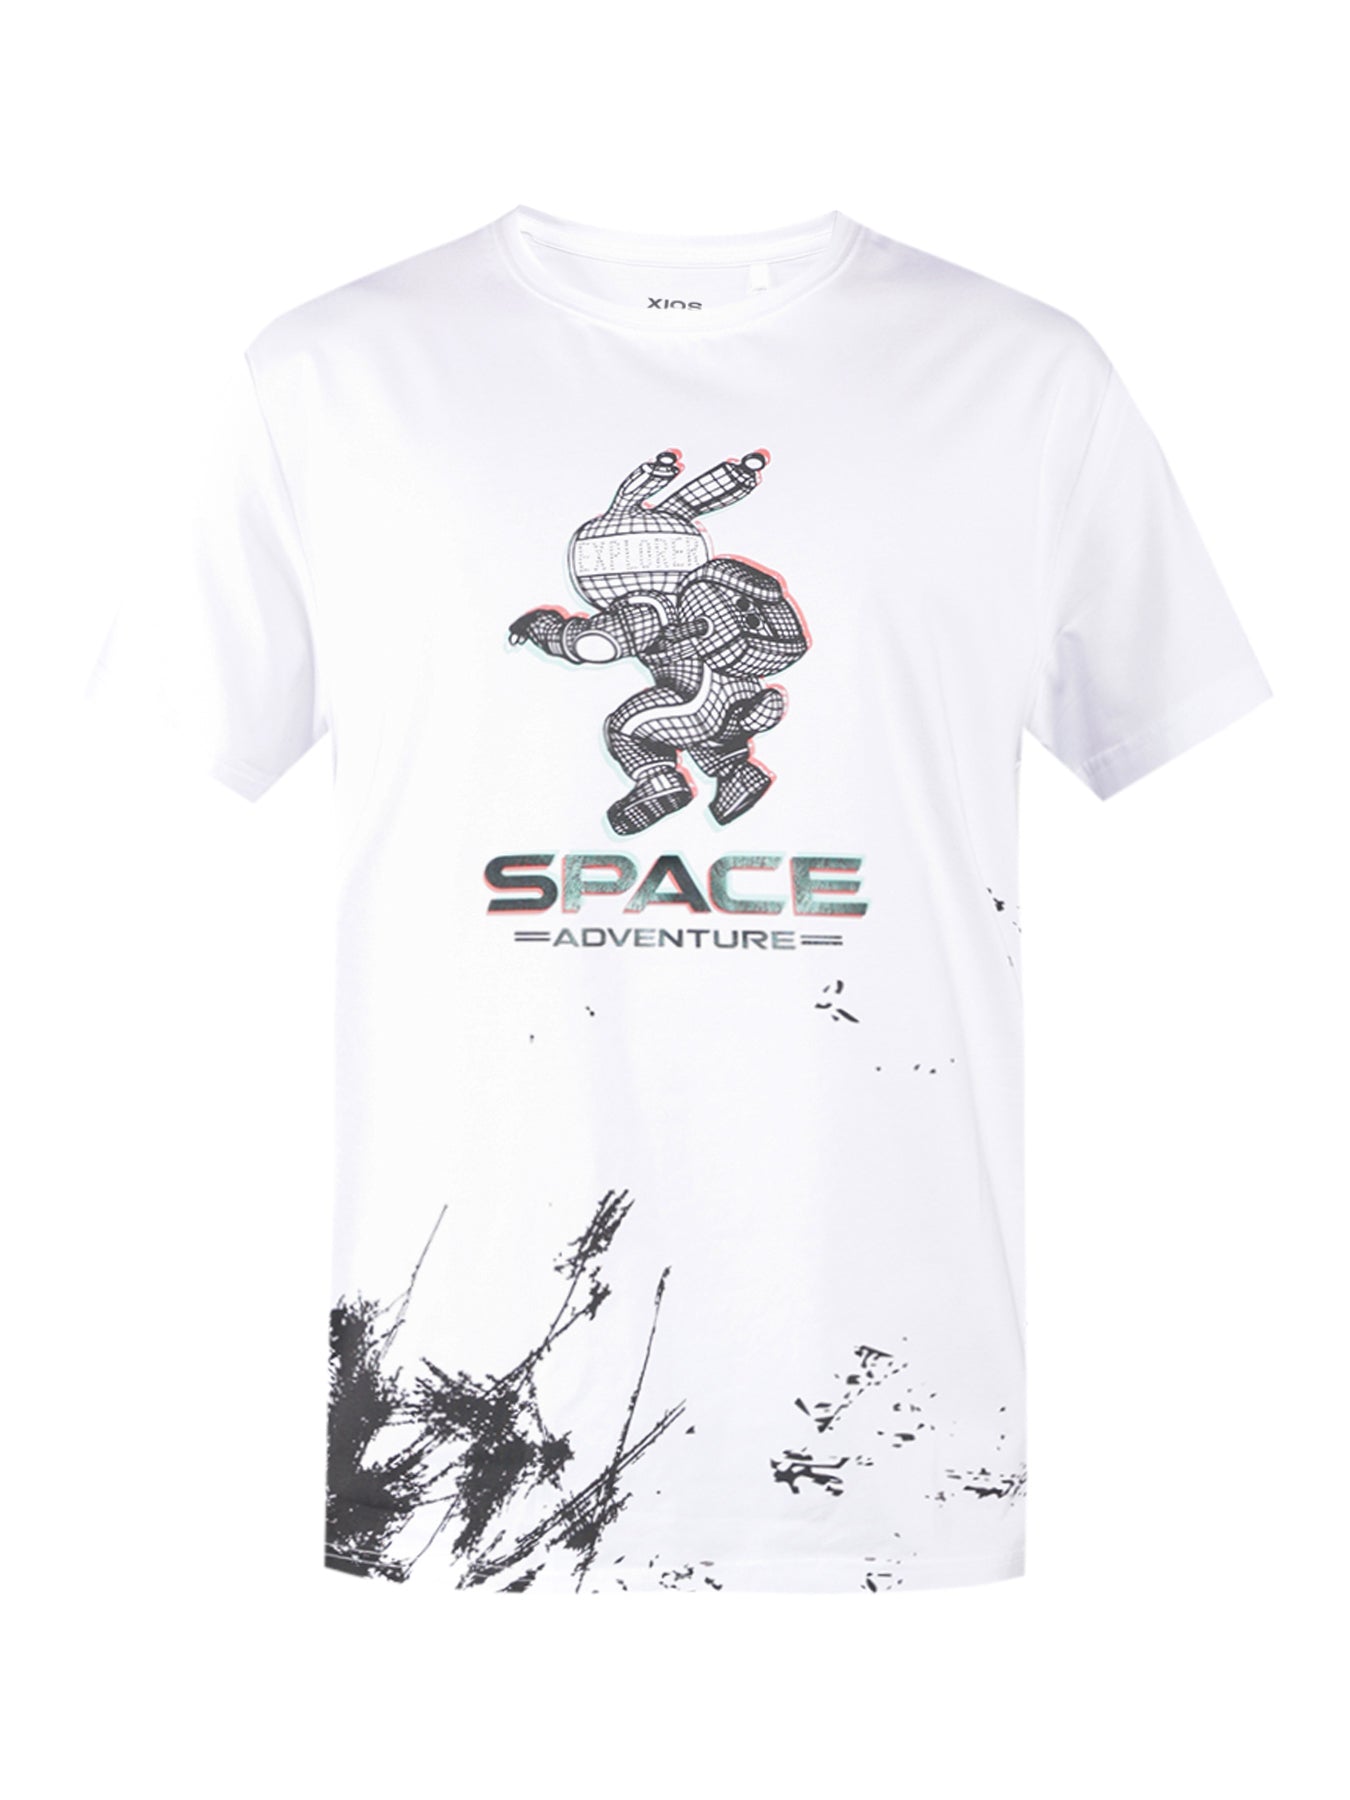 Space Bunny Graphic Tee - XIOS America